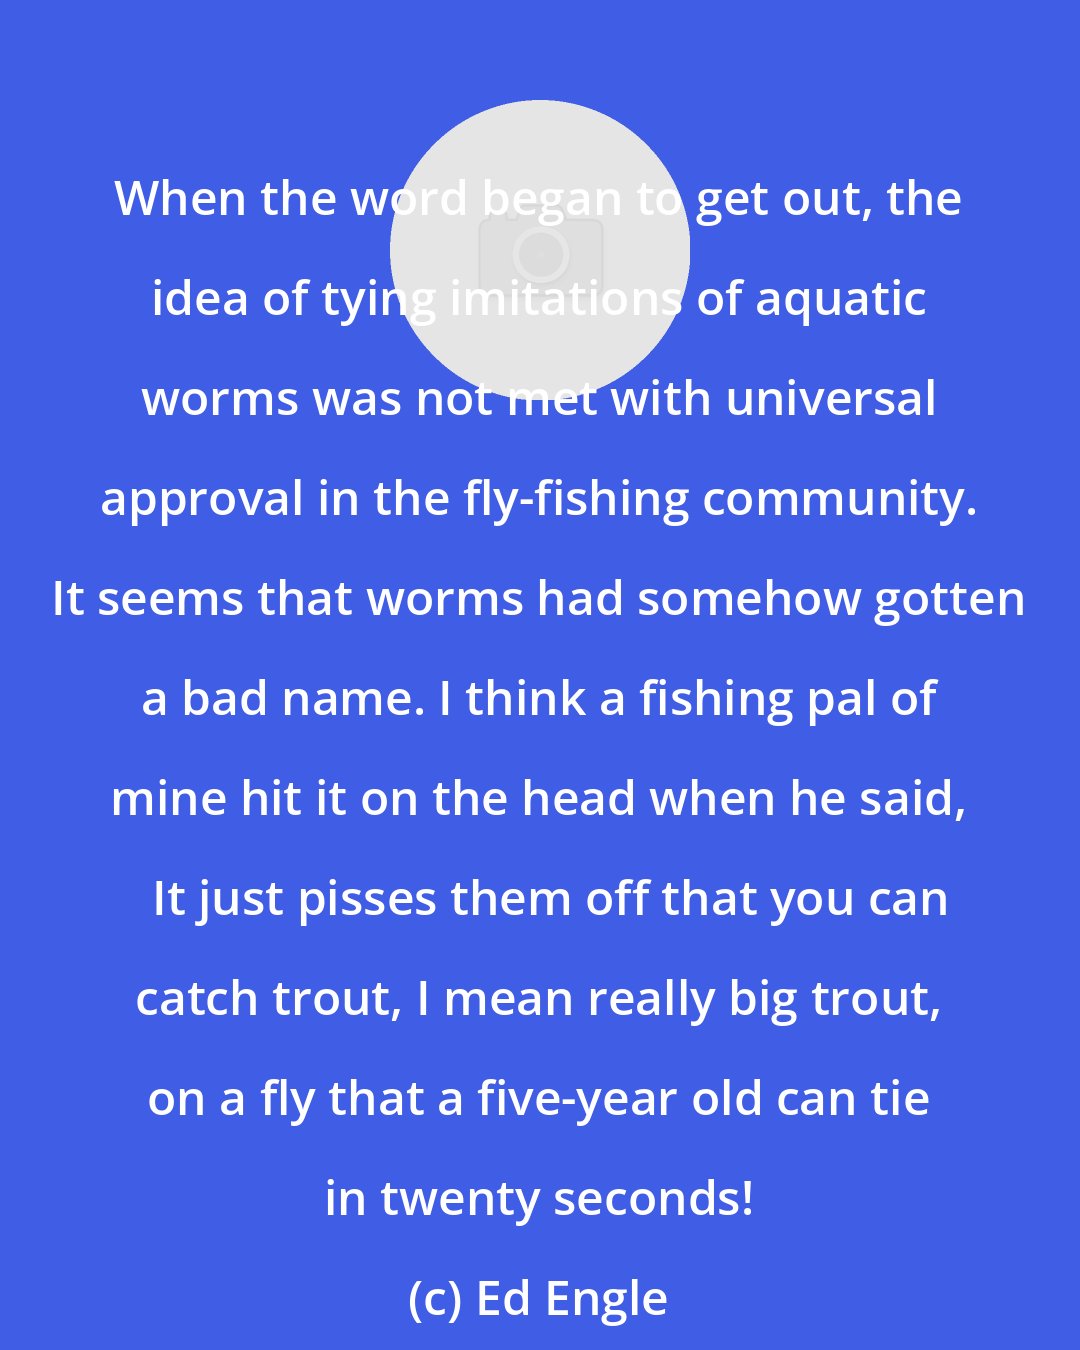 Ed Engle: When the word began to get out, the idea of tying imitations of aquatic worms was not met with universal approval in the fly-fishing community. It seems that worms had somehow gotten a bad name. I think a fishing pal of mine hit it on the head when he said,   It just pisses them off that you can catch trout, I mean really big trout, on a fly that a five-year old can tie in twenty seconds!